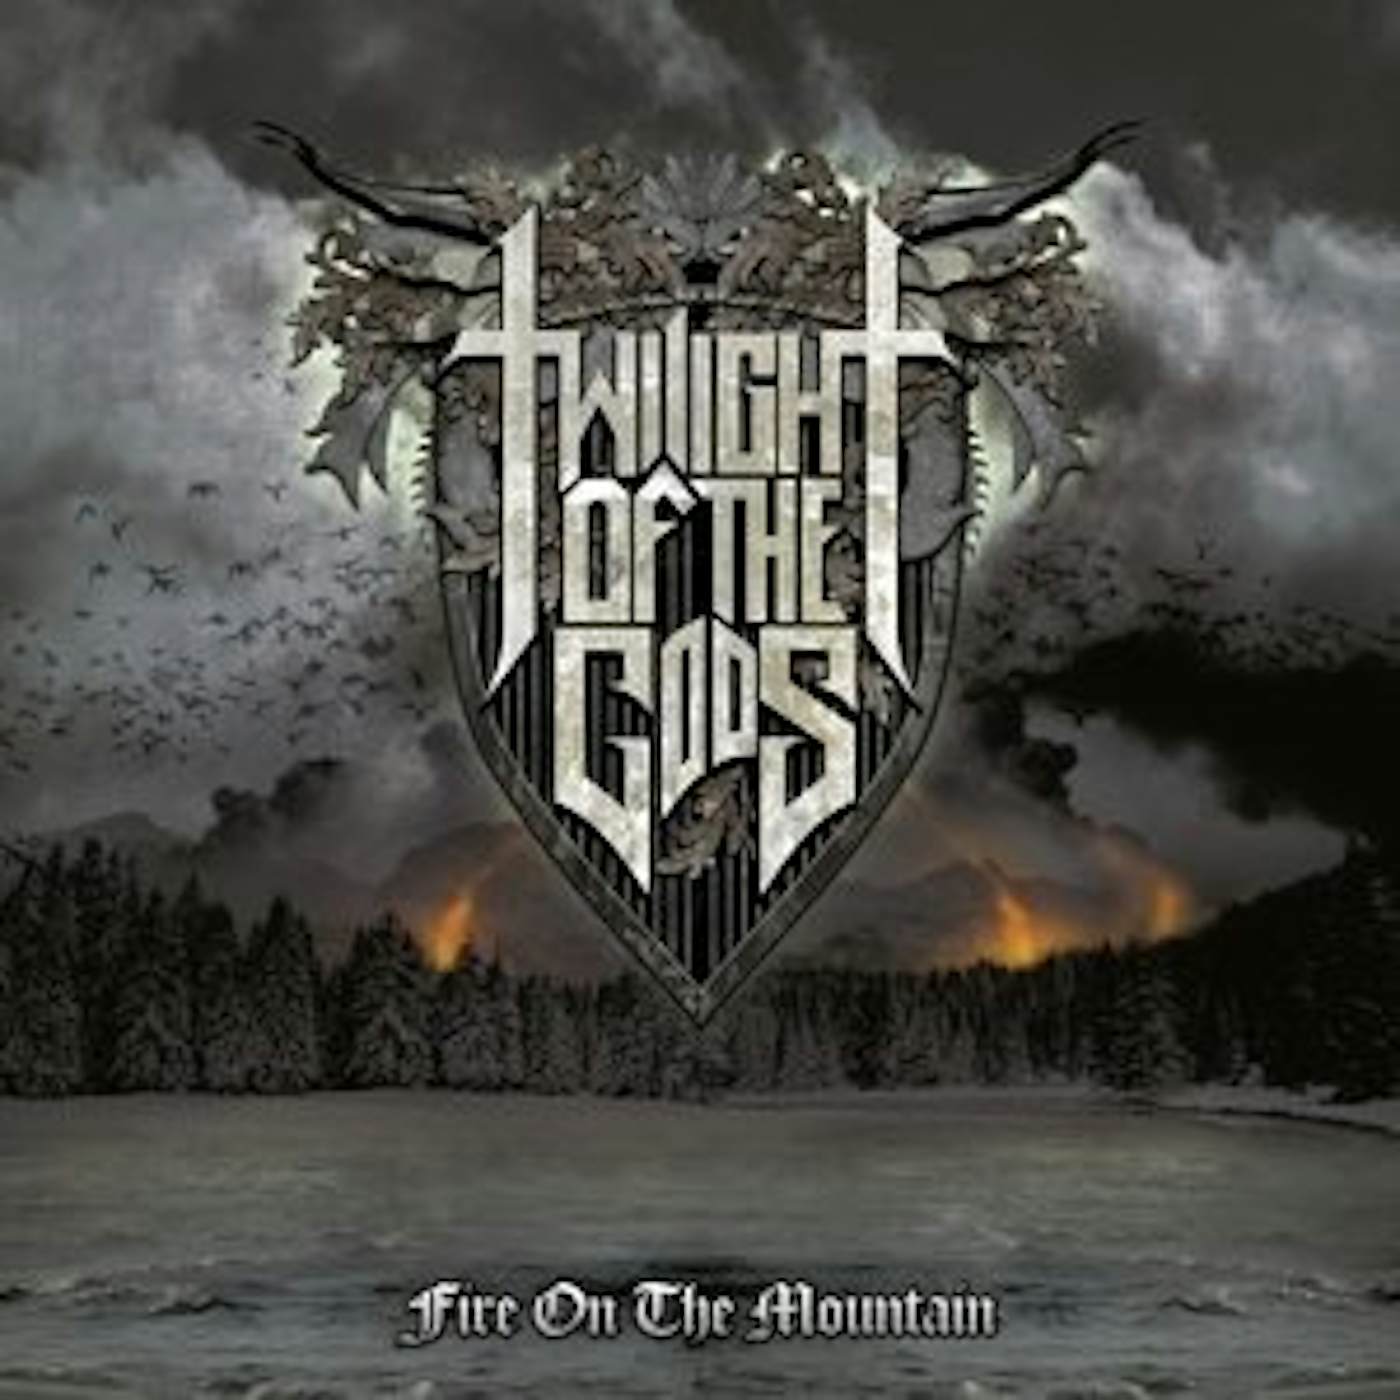 Twilight Of The Gods Fire On the Mountain Vinyl Record